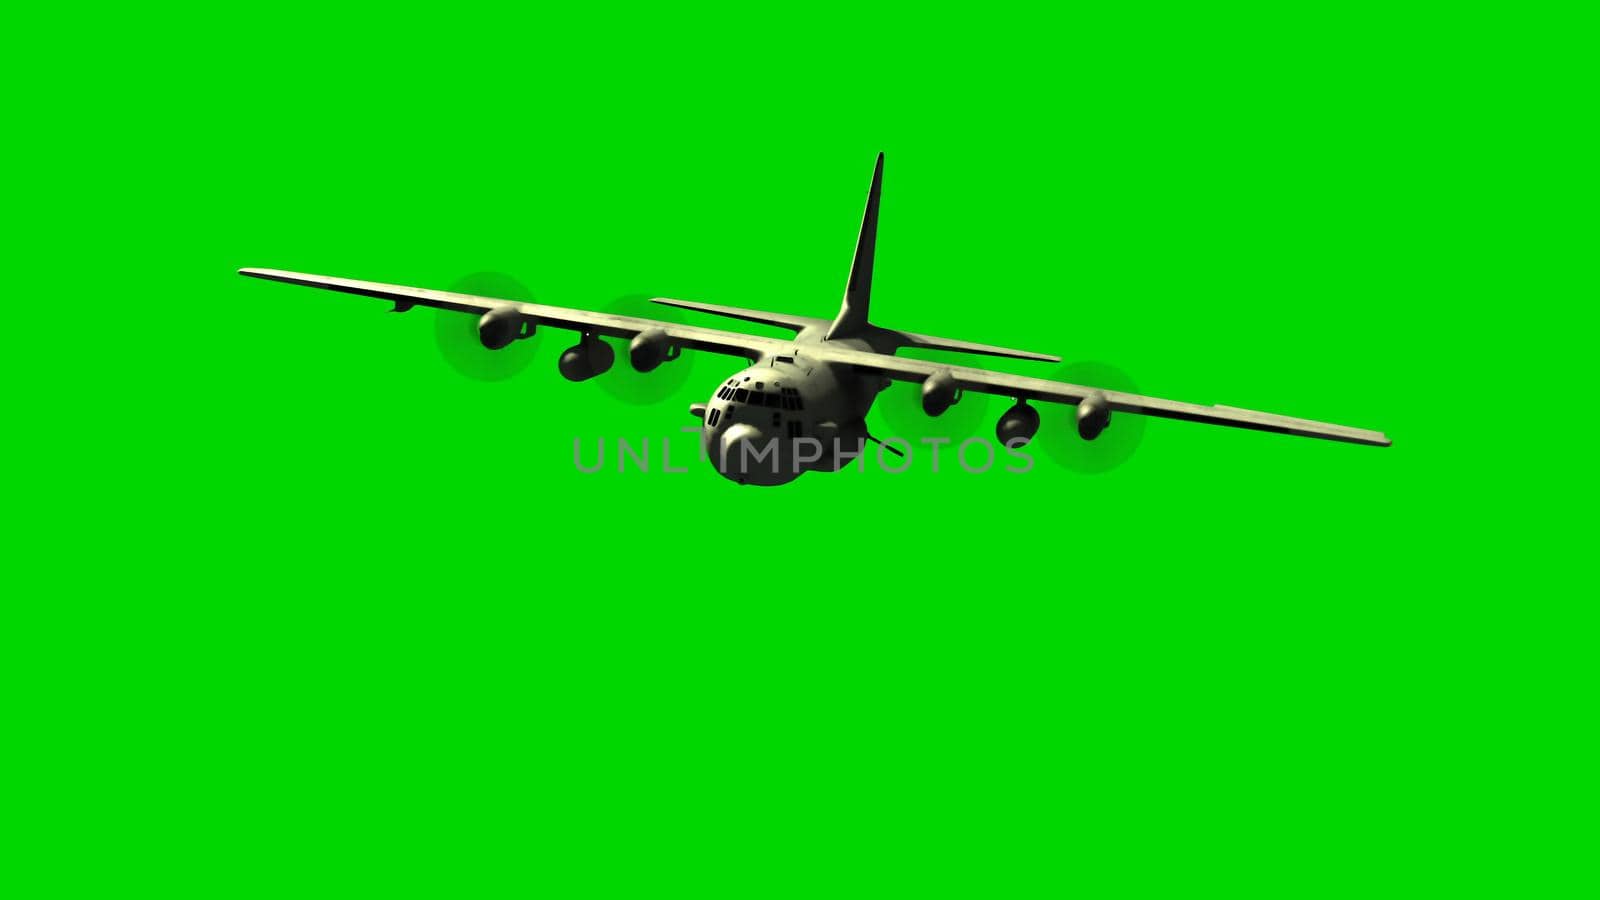 Lockheed military transport aircraft in flight on green screen. 3D rendering by designprojects